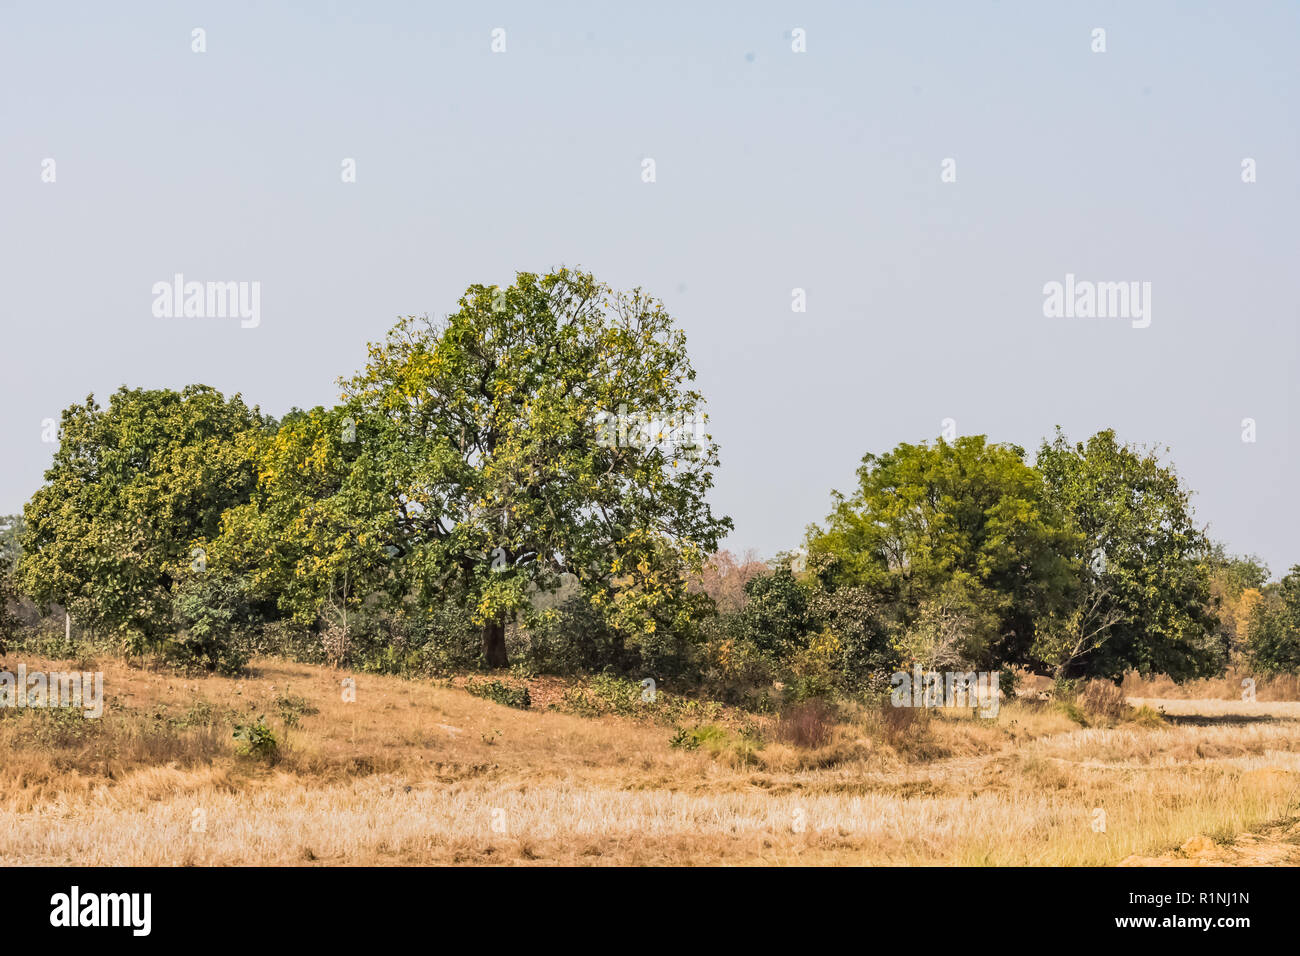 A very close view of Indian trees looking awesome in a rural forest in the summer season. Stock Photo